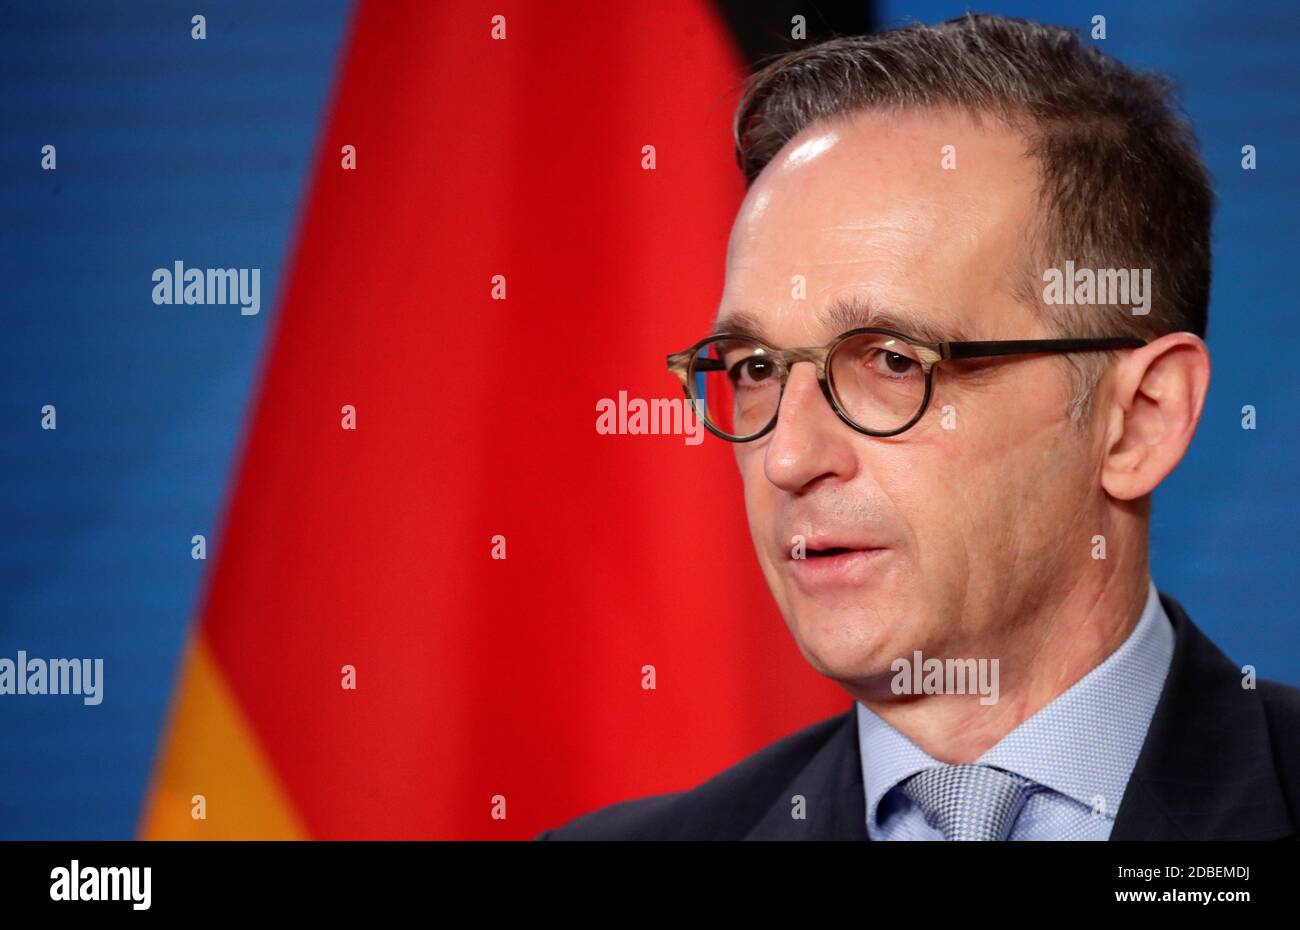 Berlin, Germany. 17th Nov, 2020. Heiko Maas (SPD), Foreign Minister, speaks at a joint press conference with his Palestinian counterpart al-Maliki. Credit: Hannibal Hanschke/Reuters Images Europe/Pool/dpa/Alamy Live News Stock Photo